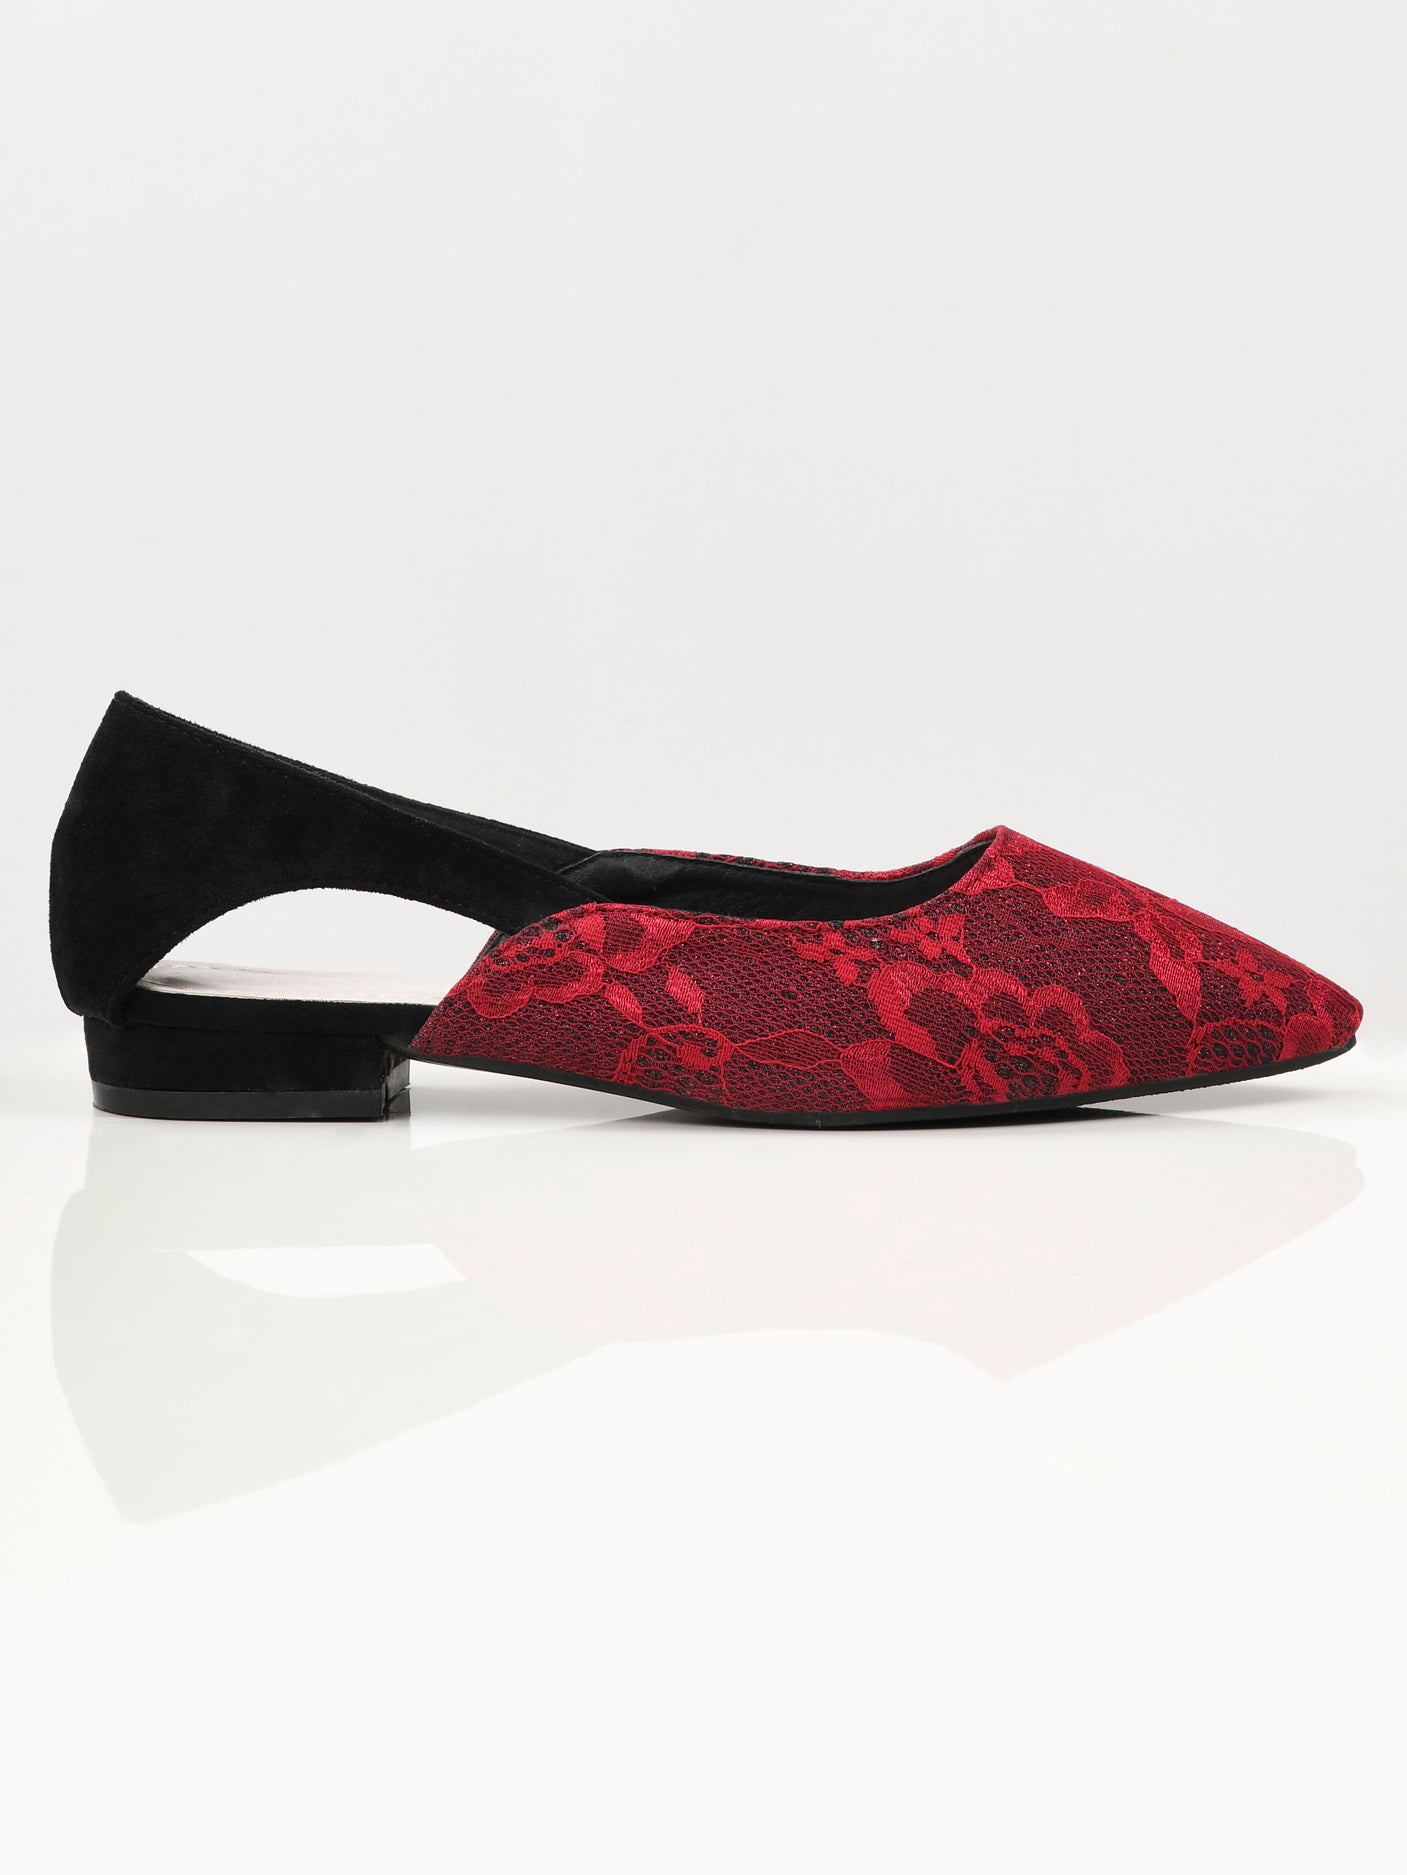 Shimmer Net Shoes - Maroon